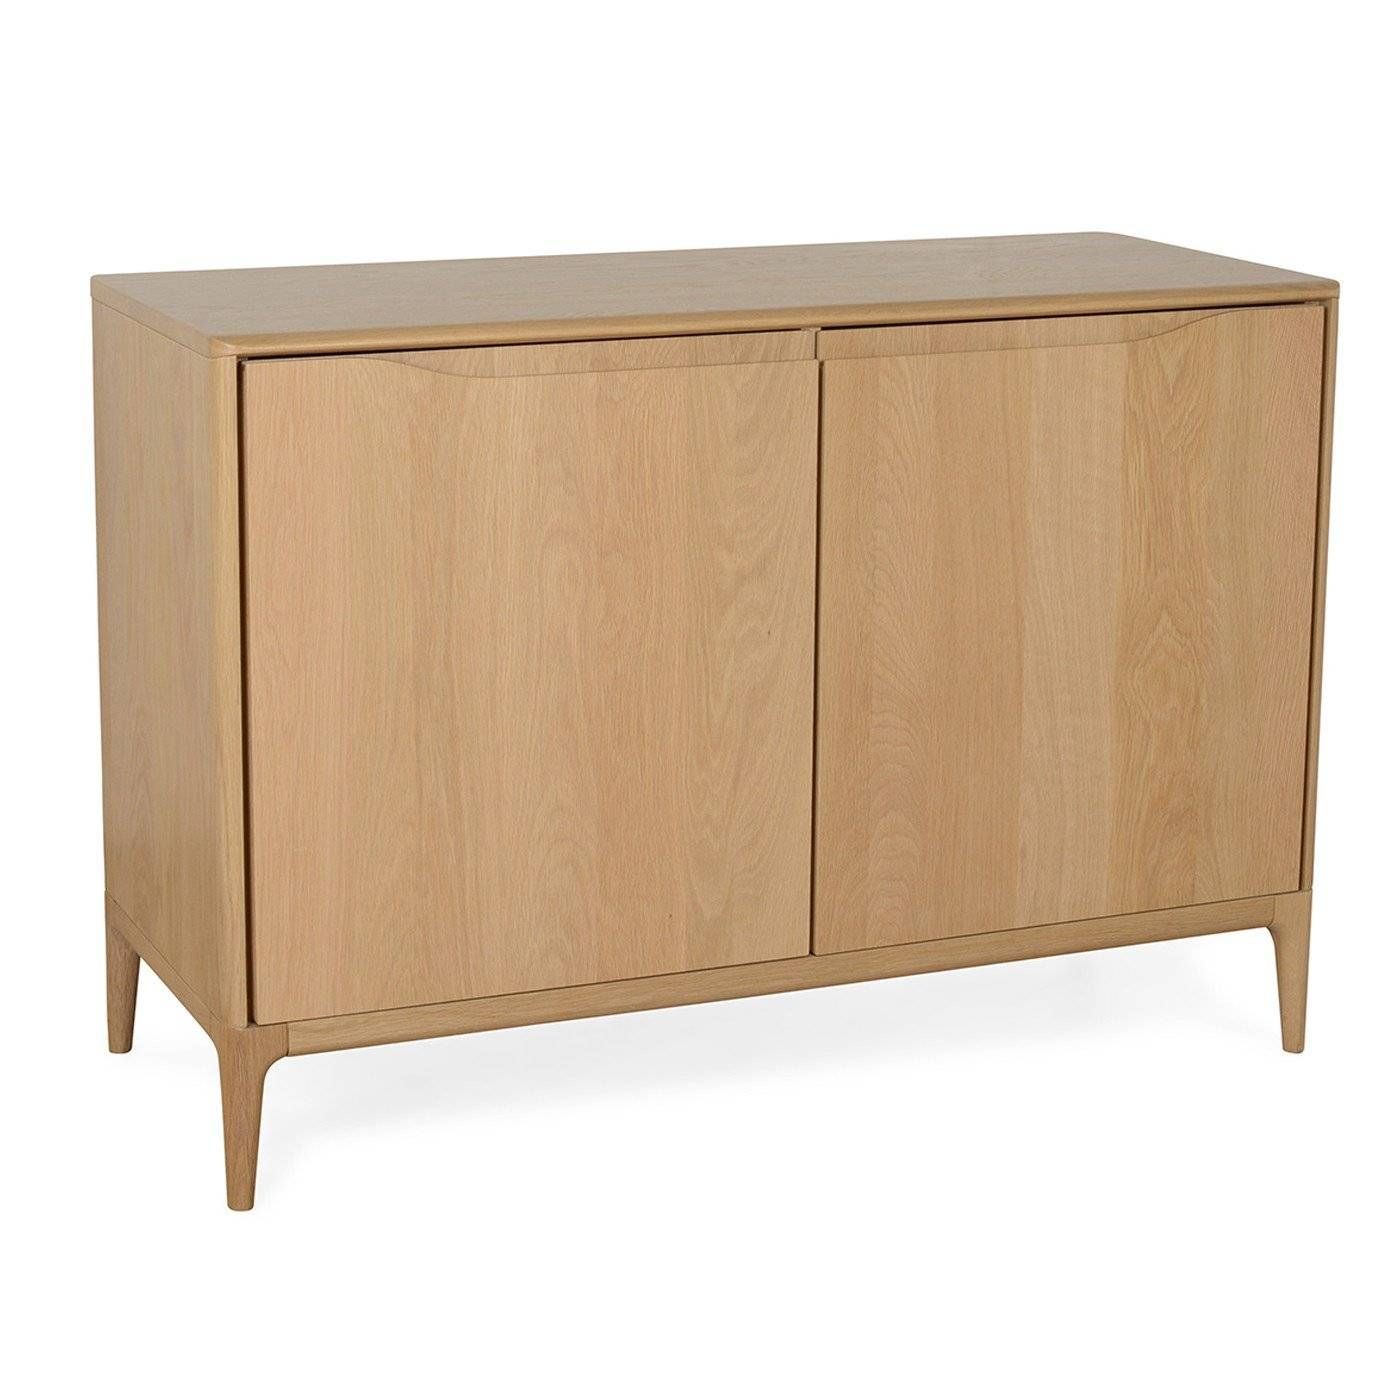 Designer Sideboards | Modern & Contemporary Sideboards | Heal's Intended For Sideboards (View 11 of 30)